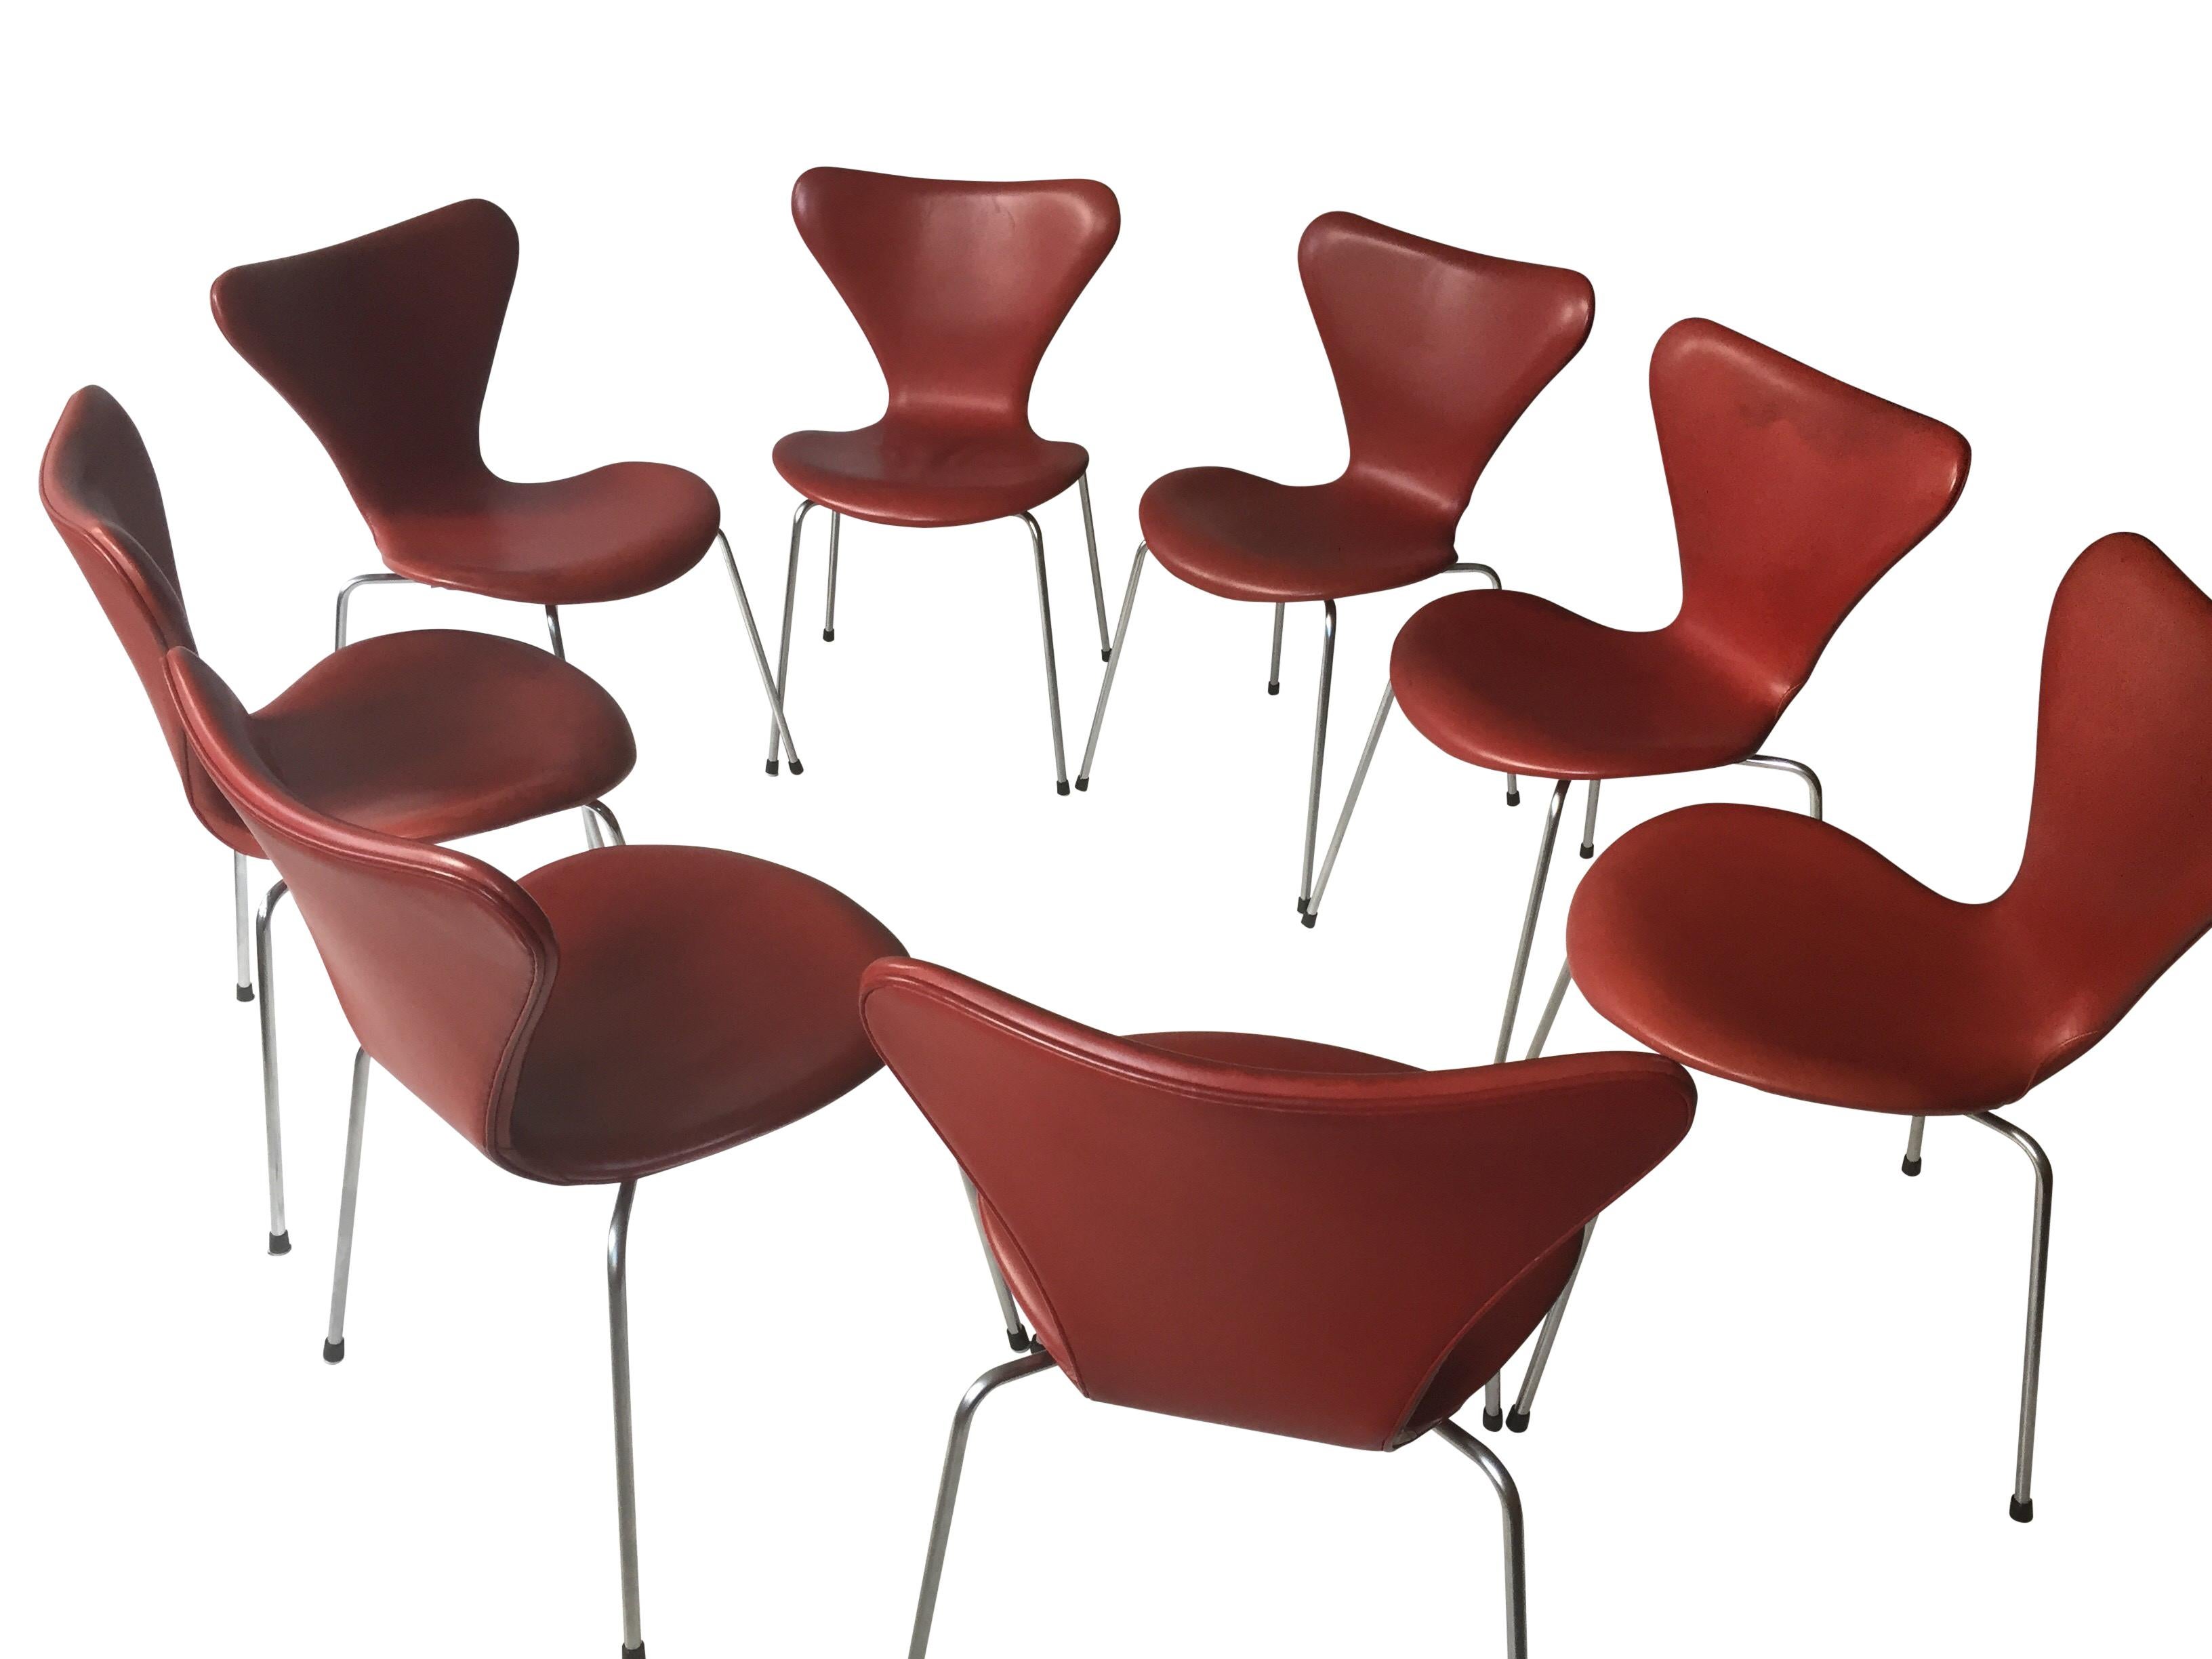 Set of Eight Danish Dining Chairs in Indian Red Leather by Arne Jacobsen 1960s For Sale 3